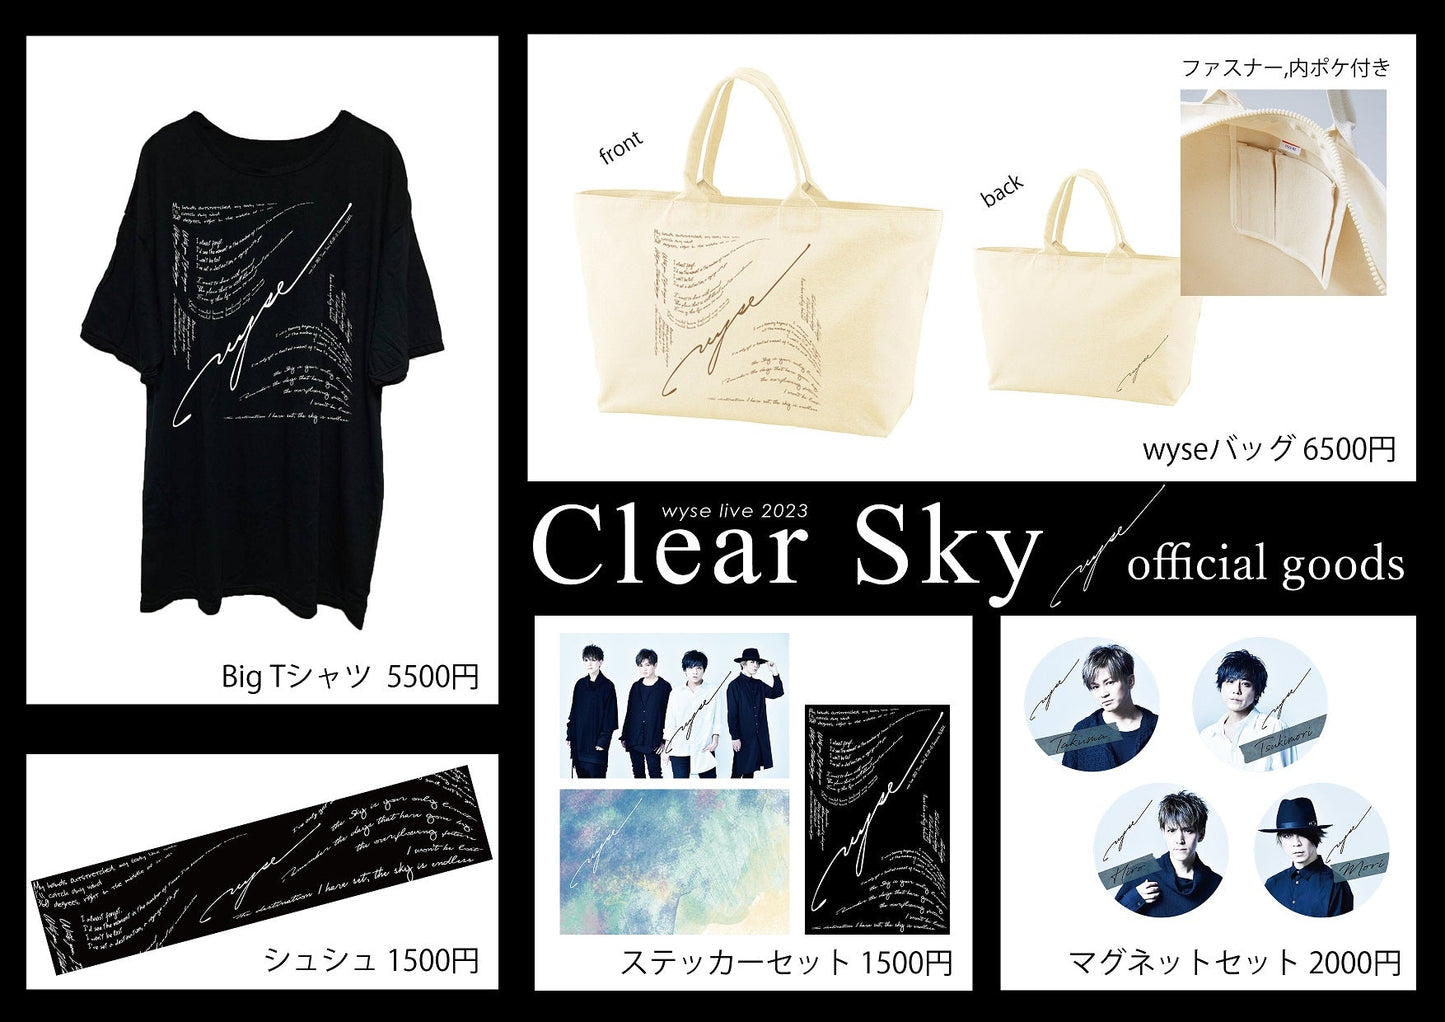 ［Live2023 Clear Sky］ステッカー3枚セット